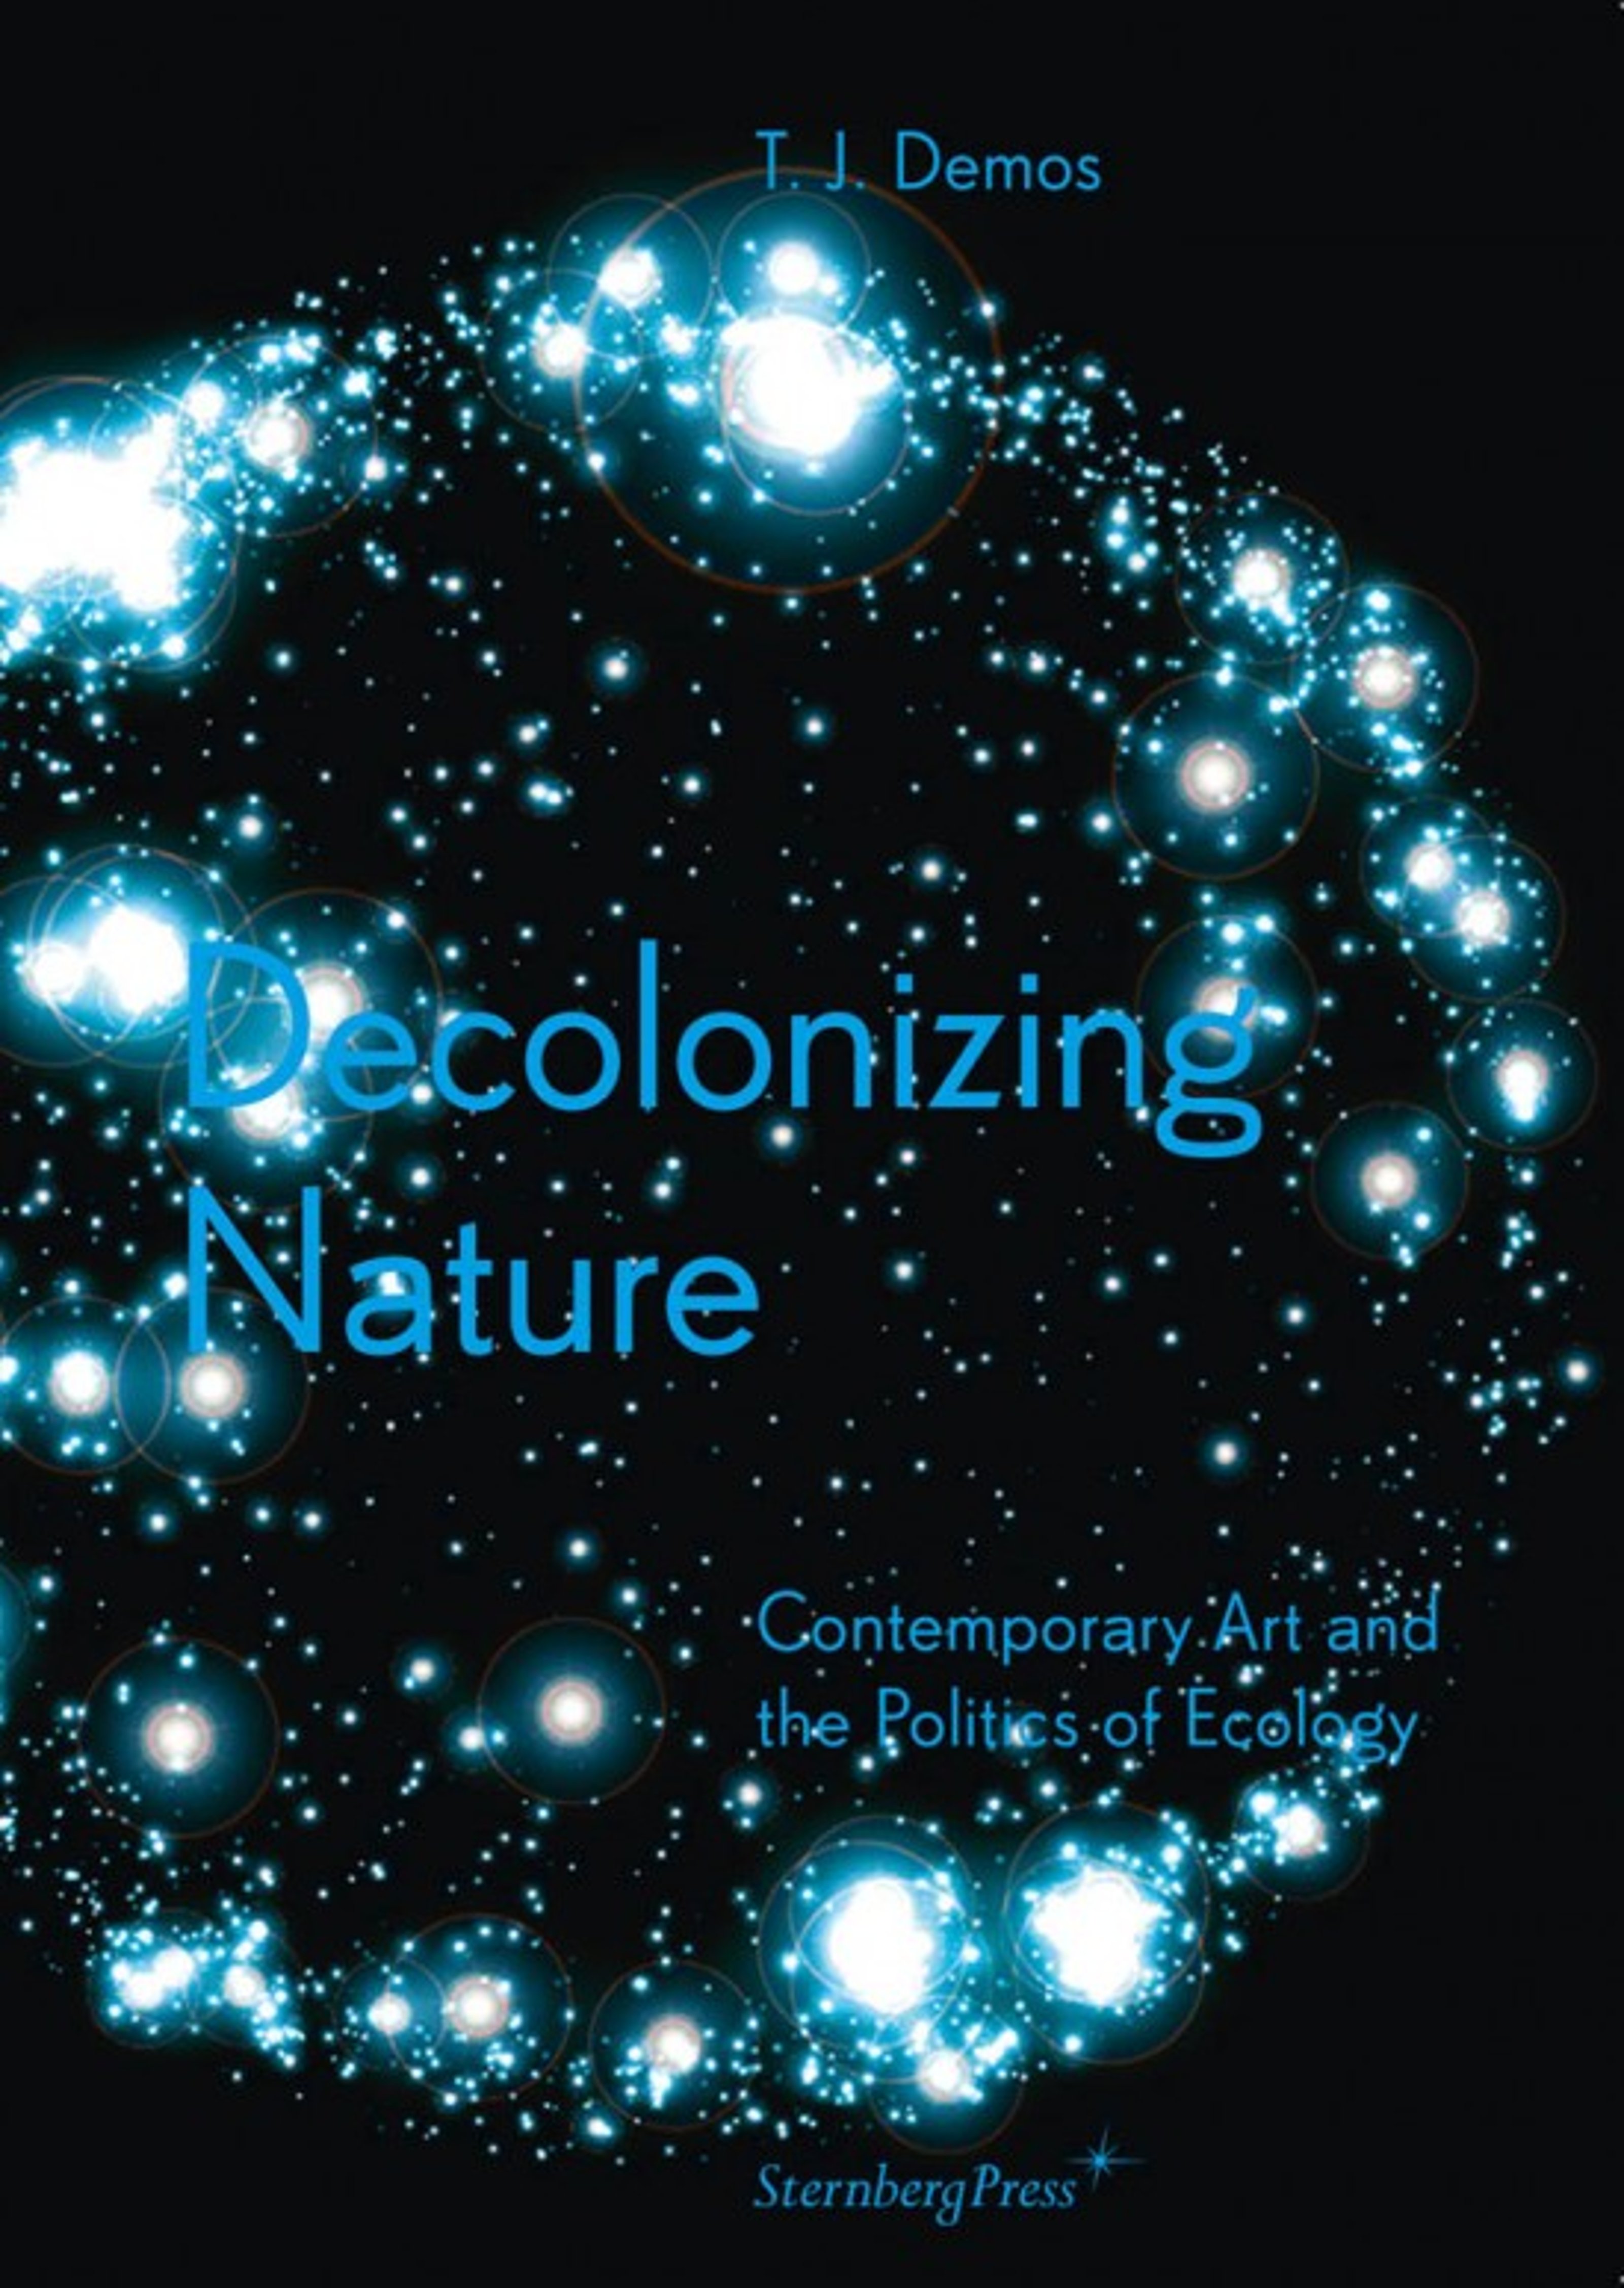 TJ Demos - Decolonizing Nature: Contemporary art and the politics of ecology